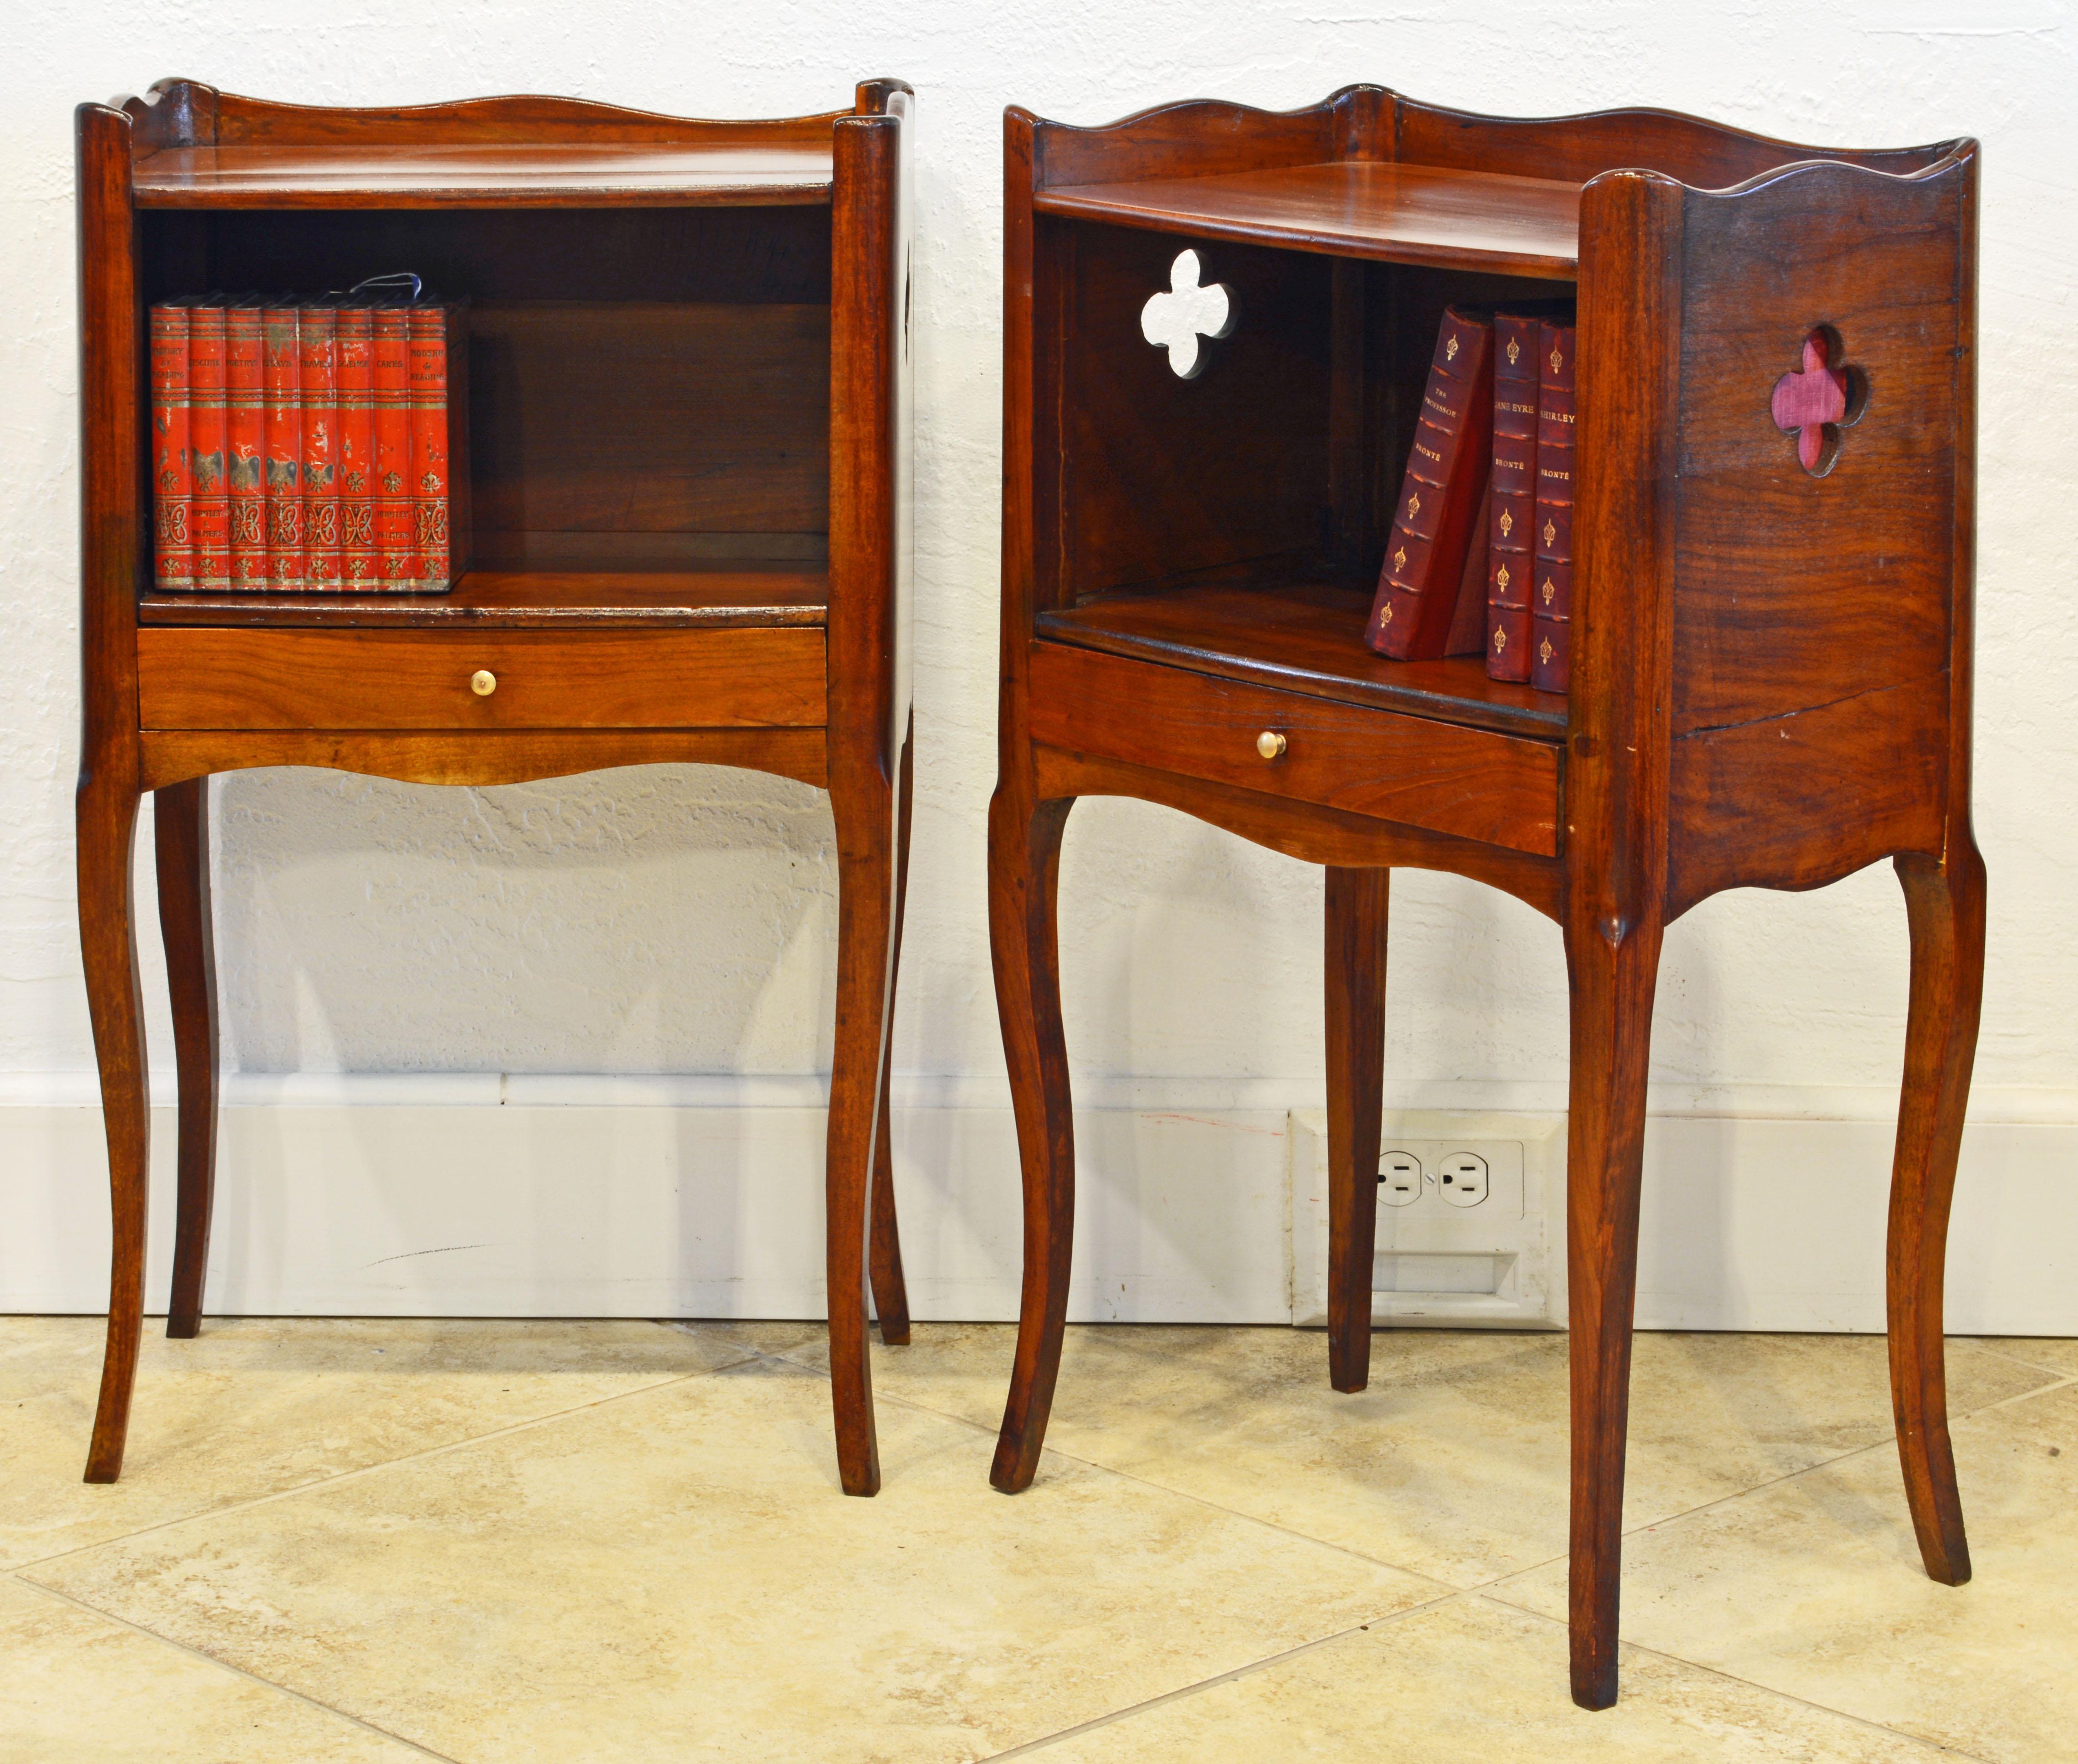 Polished Pair of 19th Century French Provincial Walnut One-Drawer Side Tables or Stands